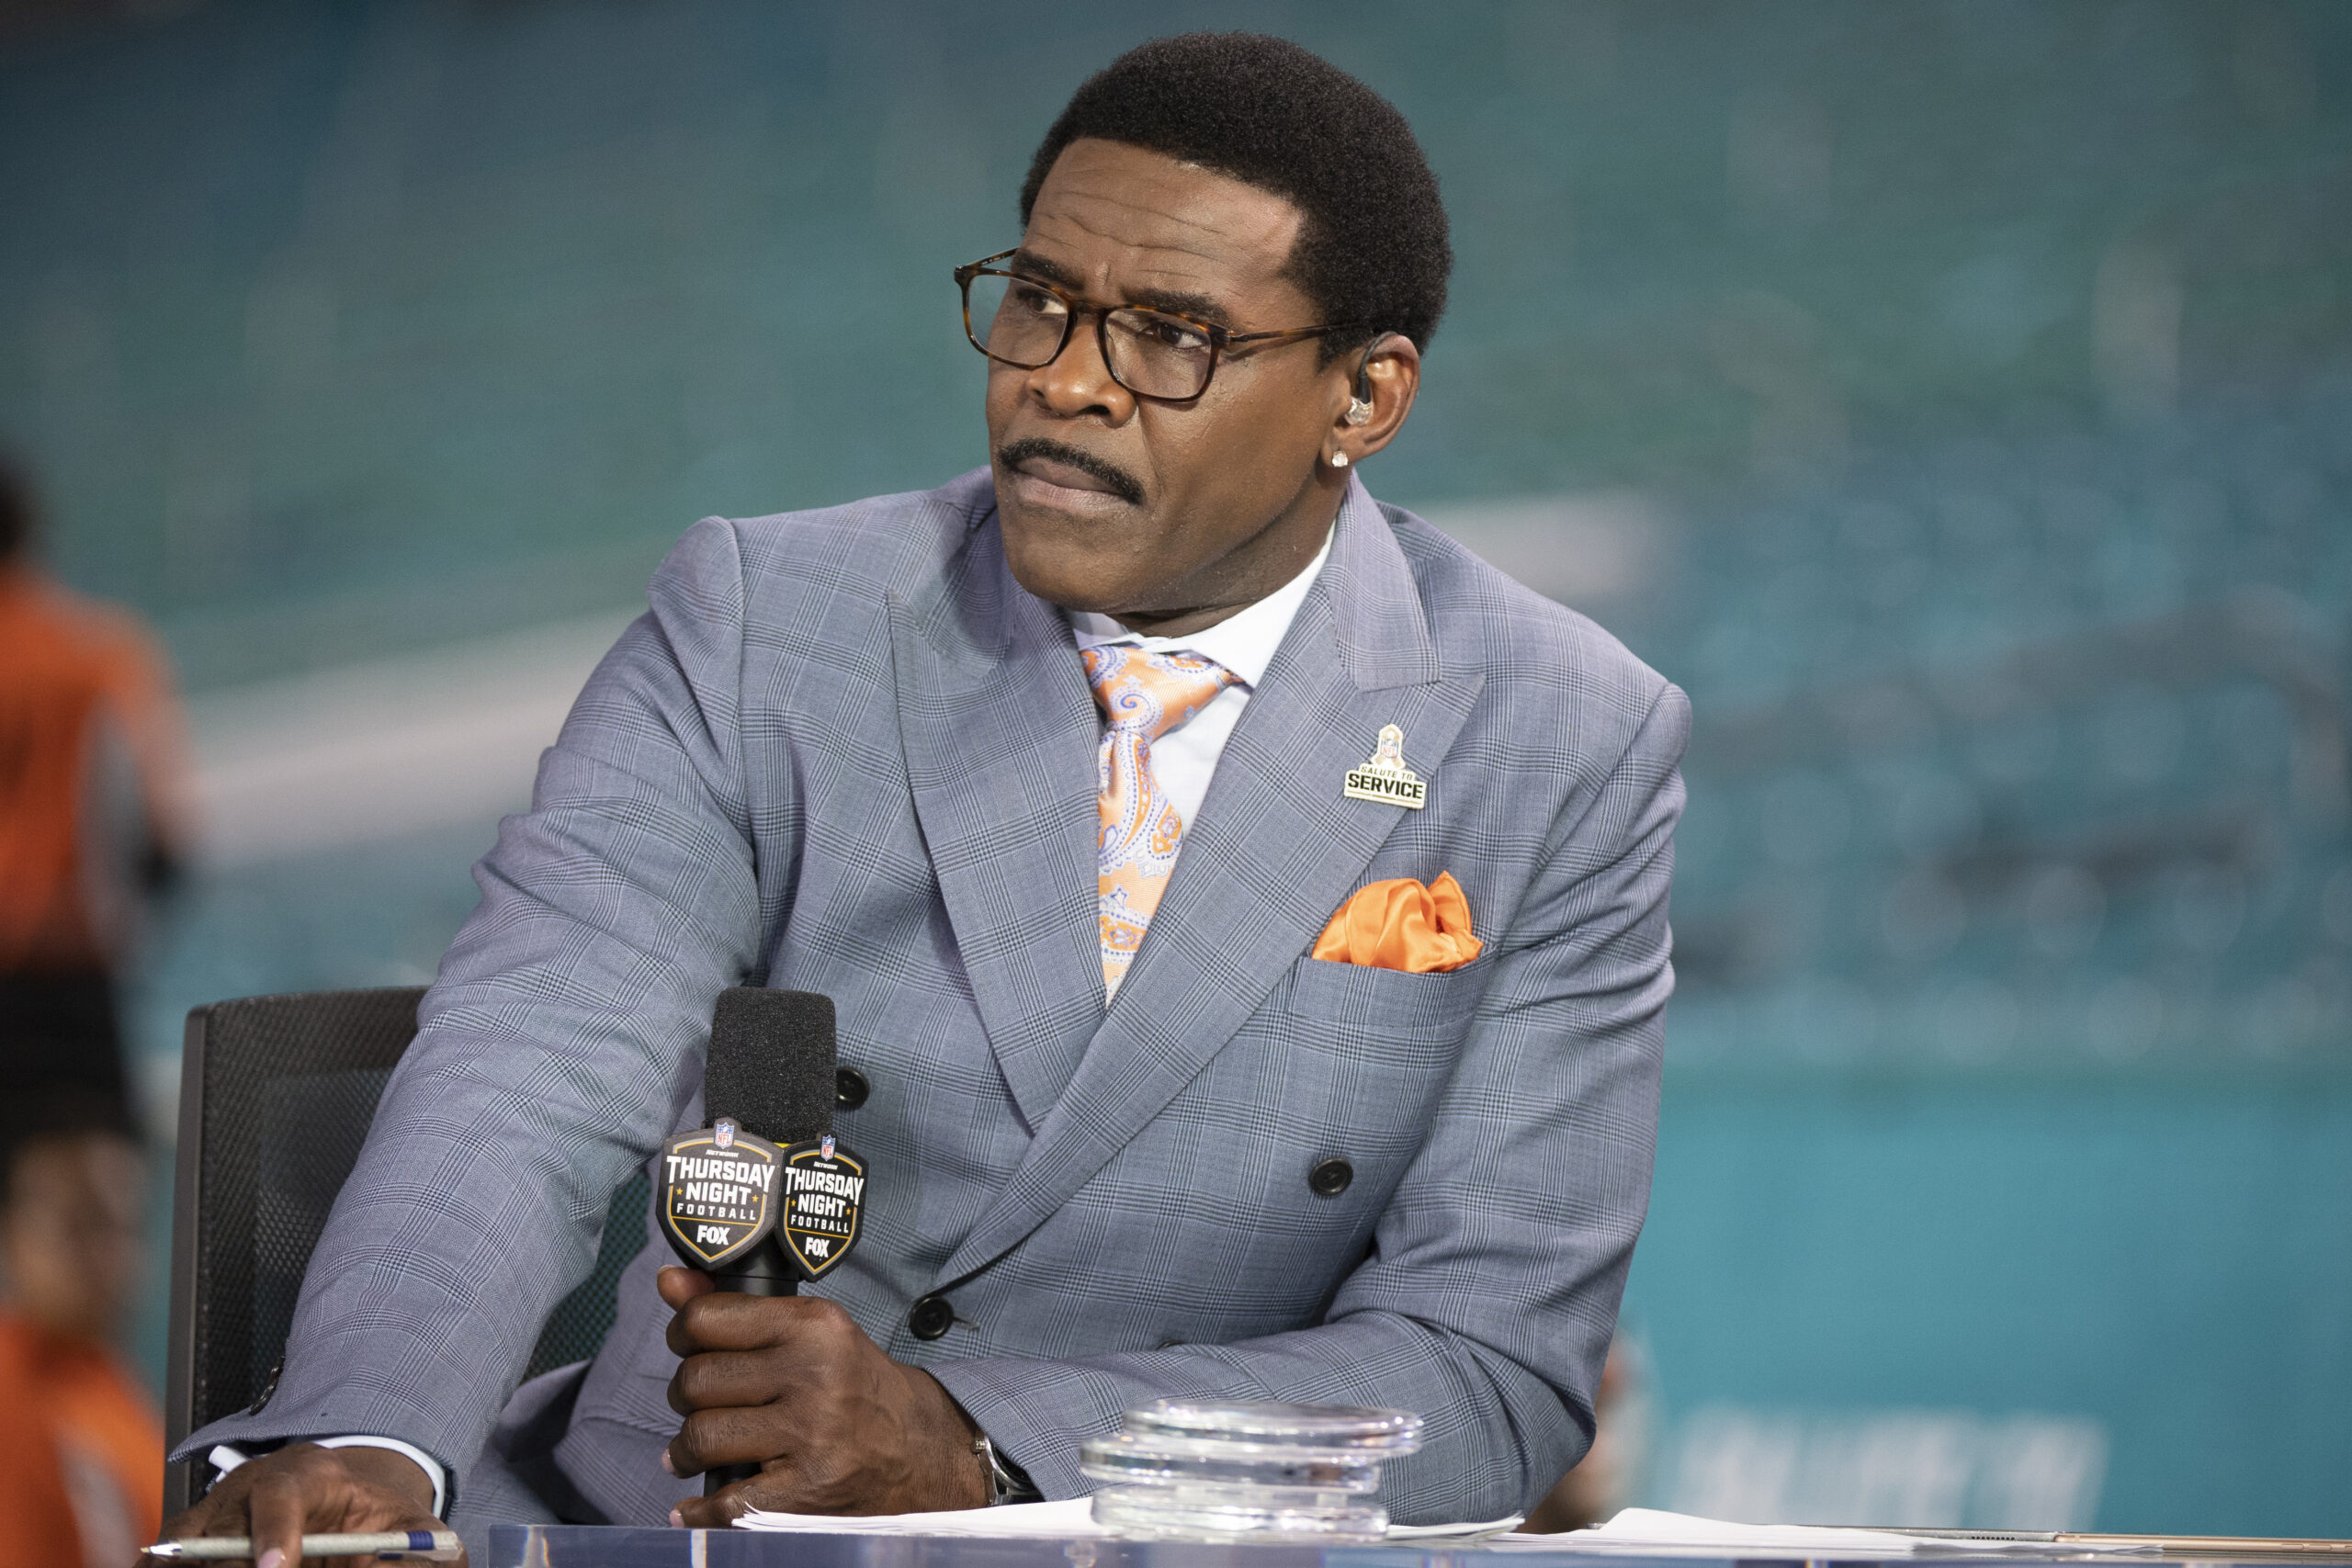 Michael Irvin Files $100 Million Lawsuit After Woman’s Misconduct Allegations Led to Being Pulled Off Air